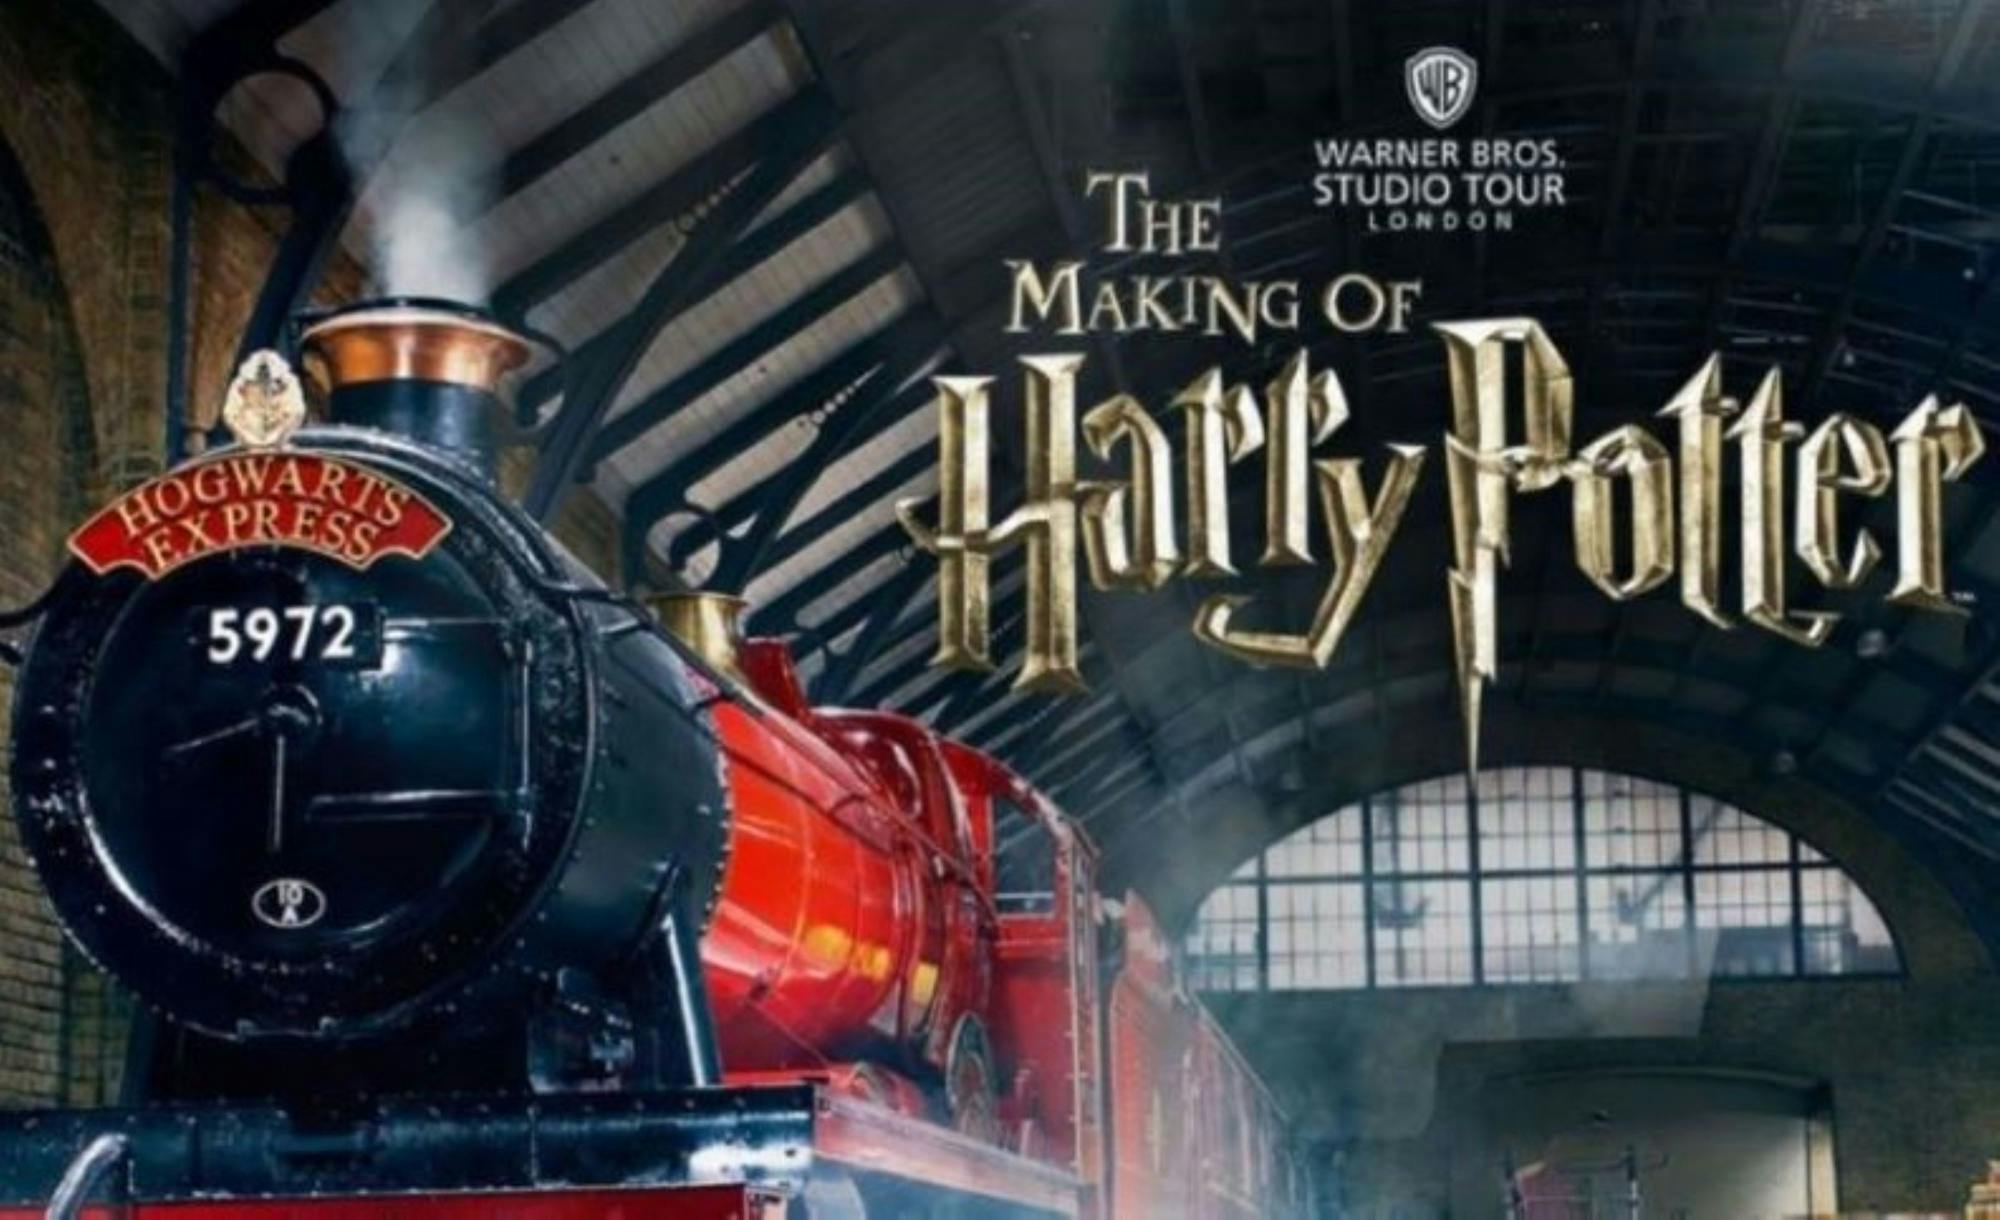 "The Making of Harry Potter" from Birmingham in First Class